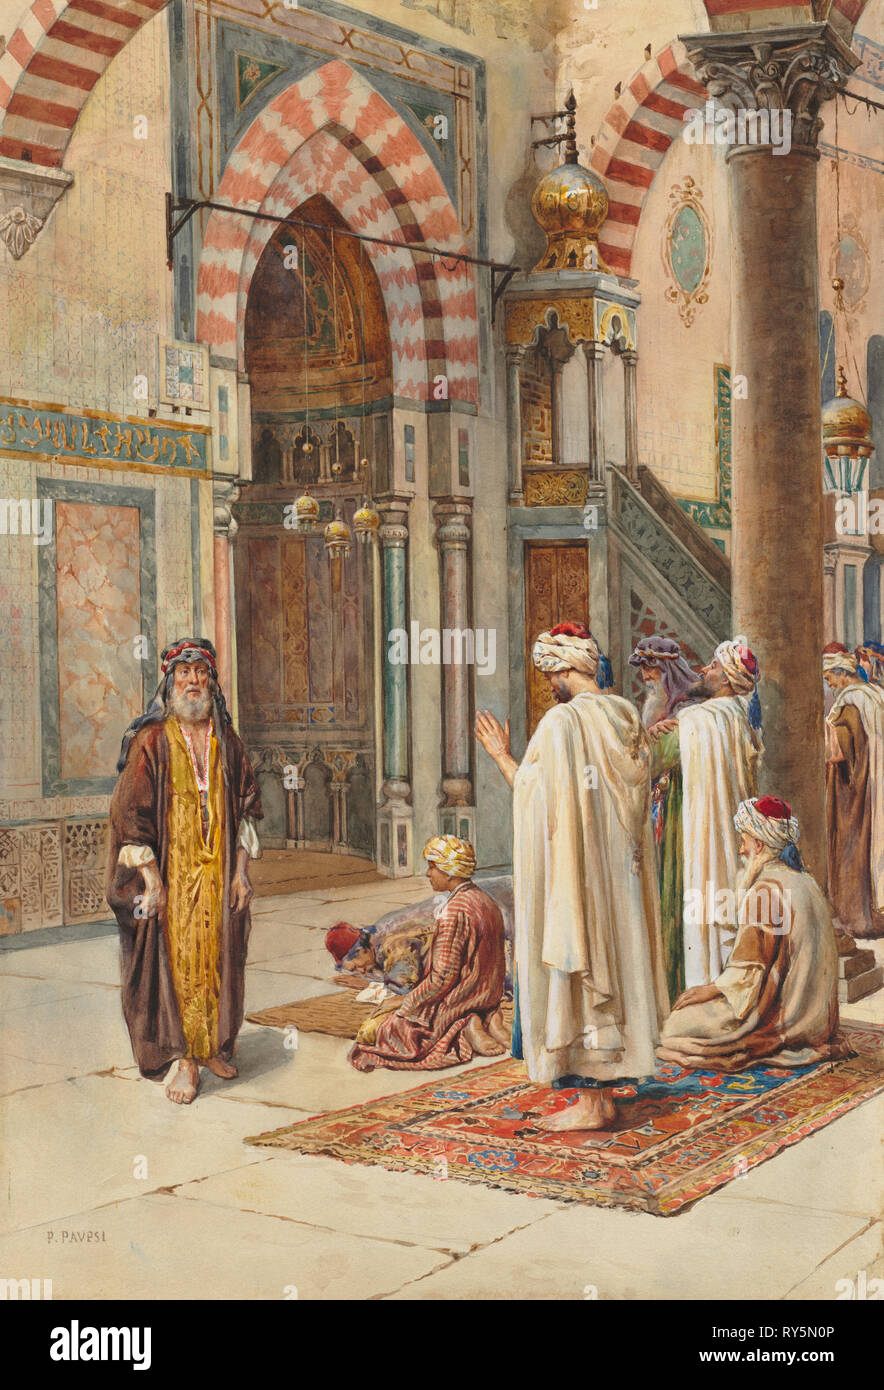 Moslems at Prayer, late 1800s-early 1900s. P. Pavesi (Italian). Watercolor on heavy board; unframed: 46.7 x 36.9 cm (18 3/8 x 14 1/2 in Stock Photo